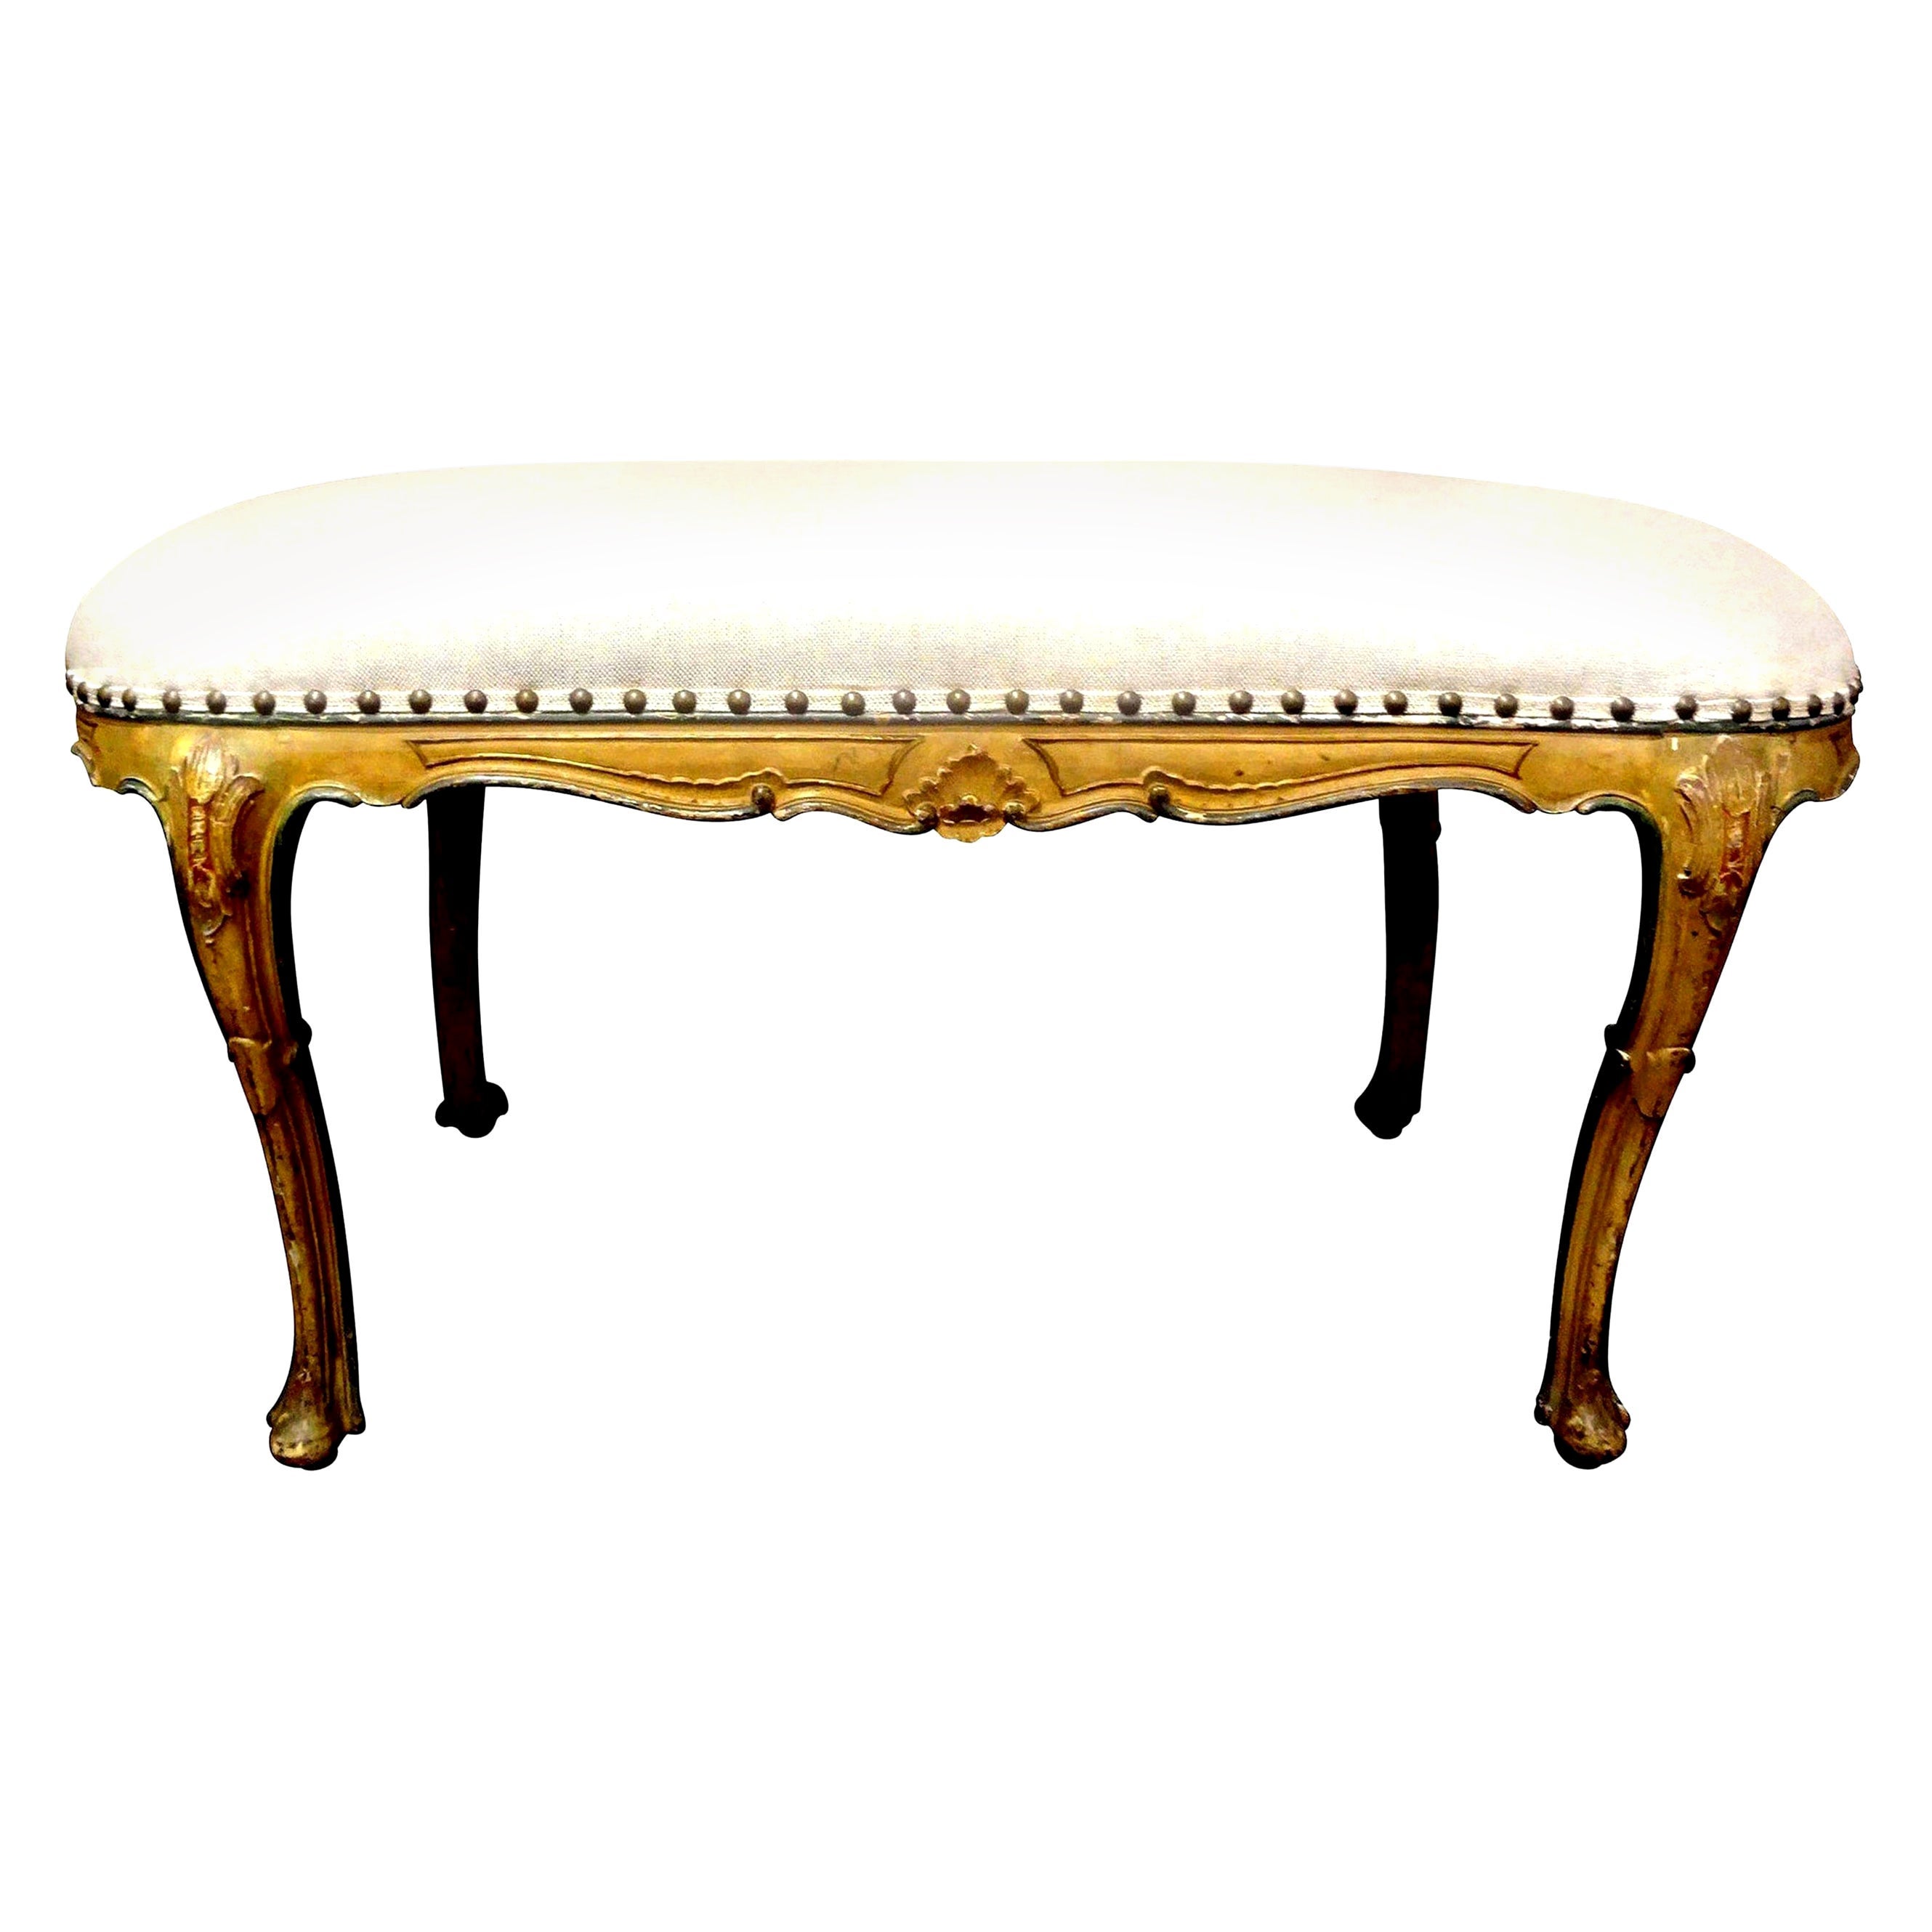 Antique Italian Regence / Louis XV Style Painted Bench For Sale